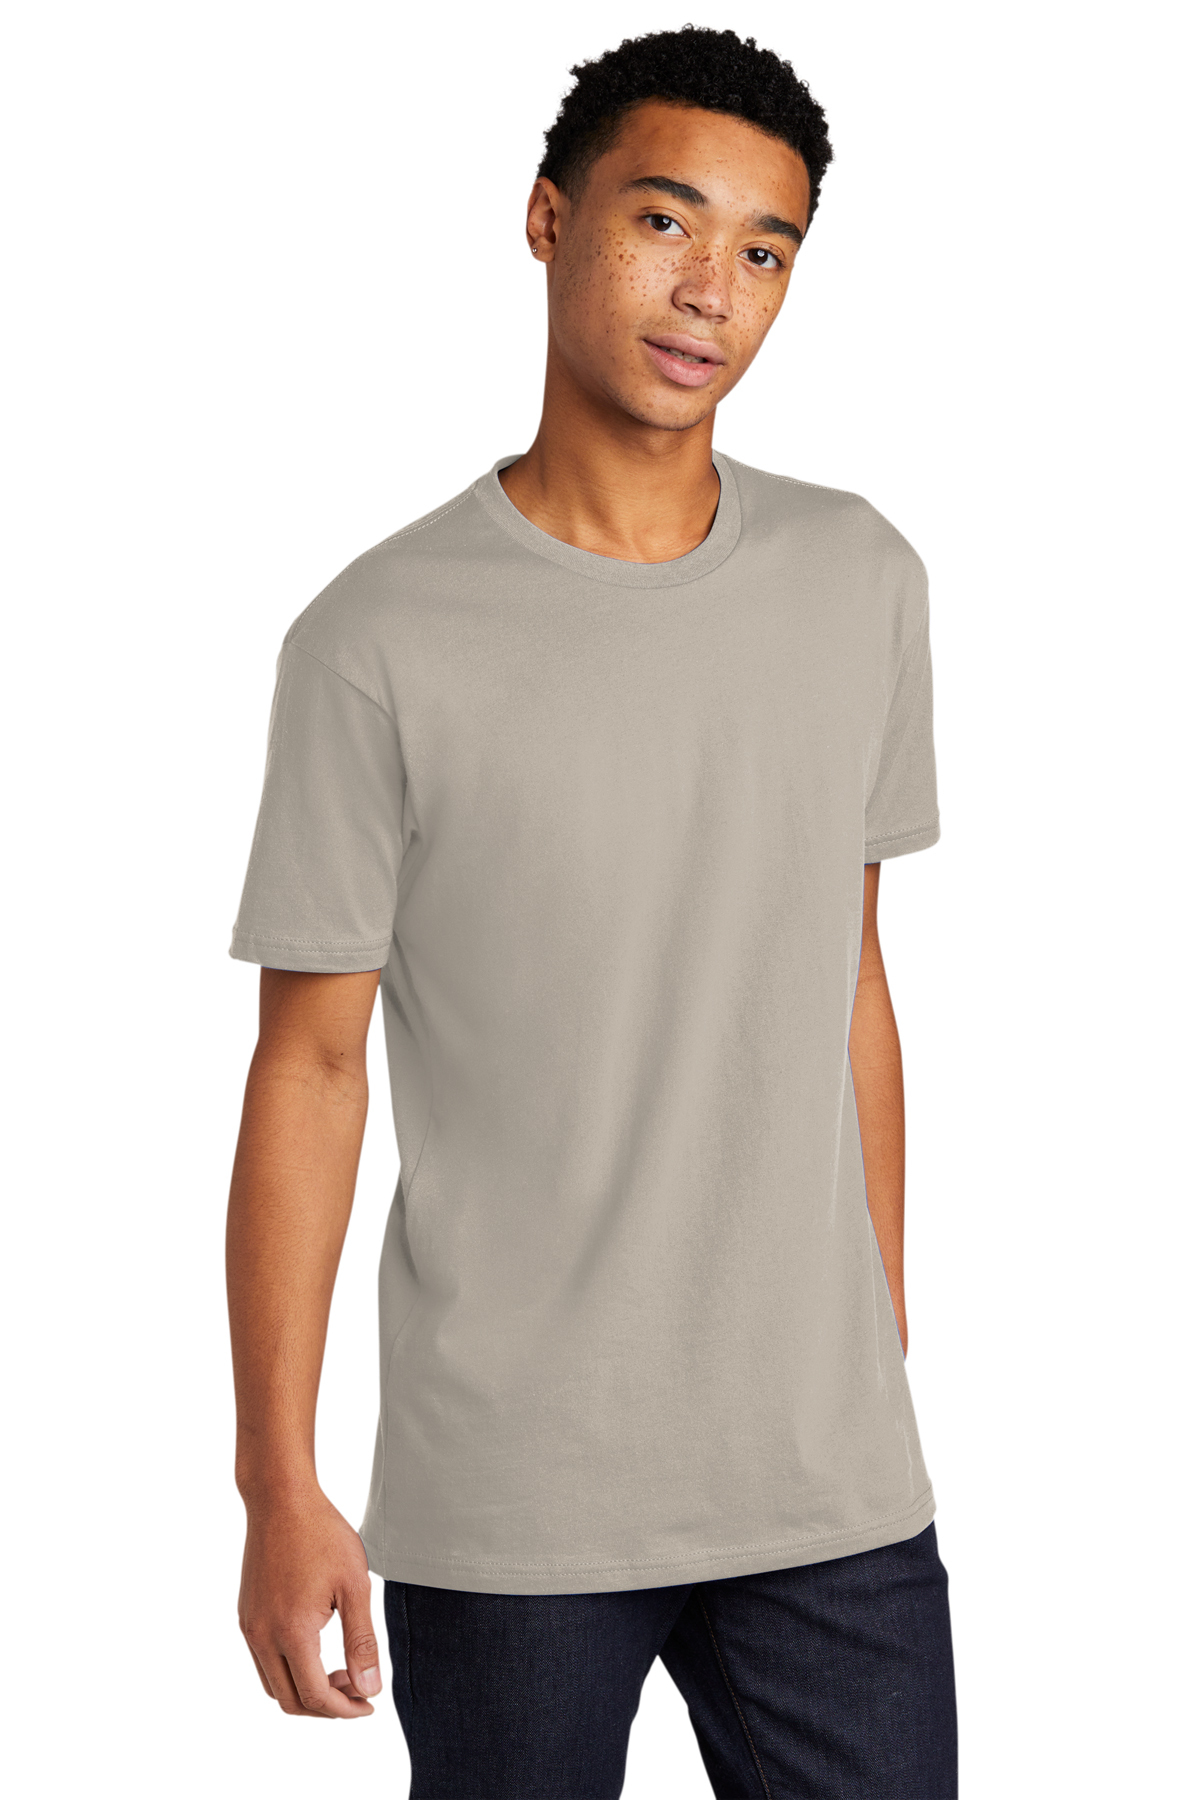 Next Level Apparel Unisex Cotton Tee | Product | Company Casuals